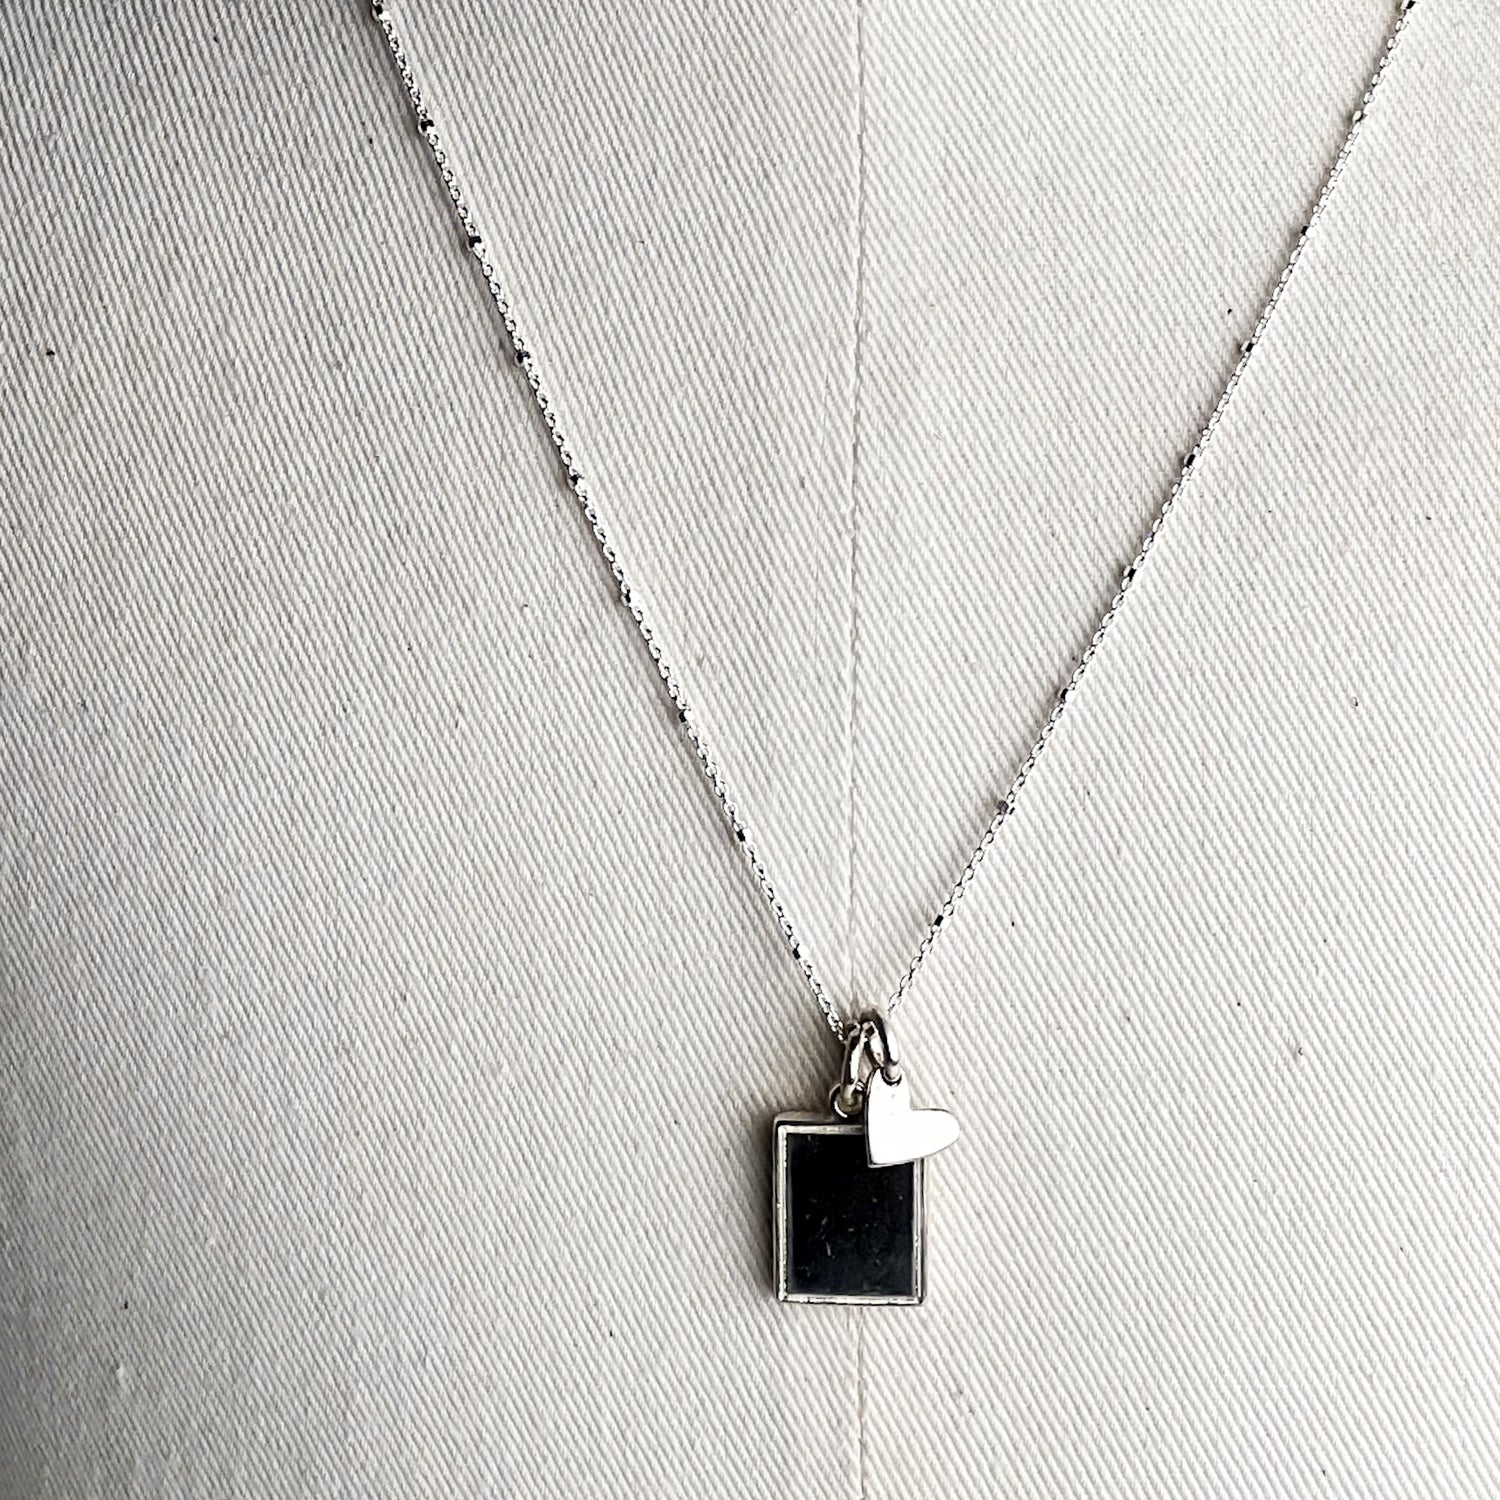 Jewelry | Frame with Heart Tag Stack